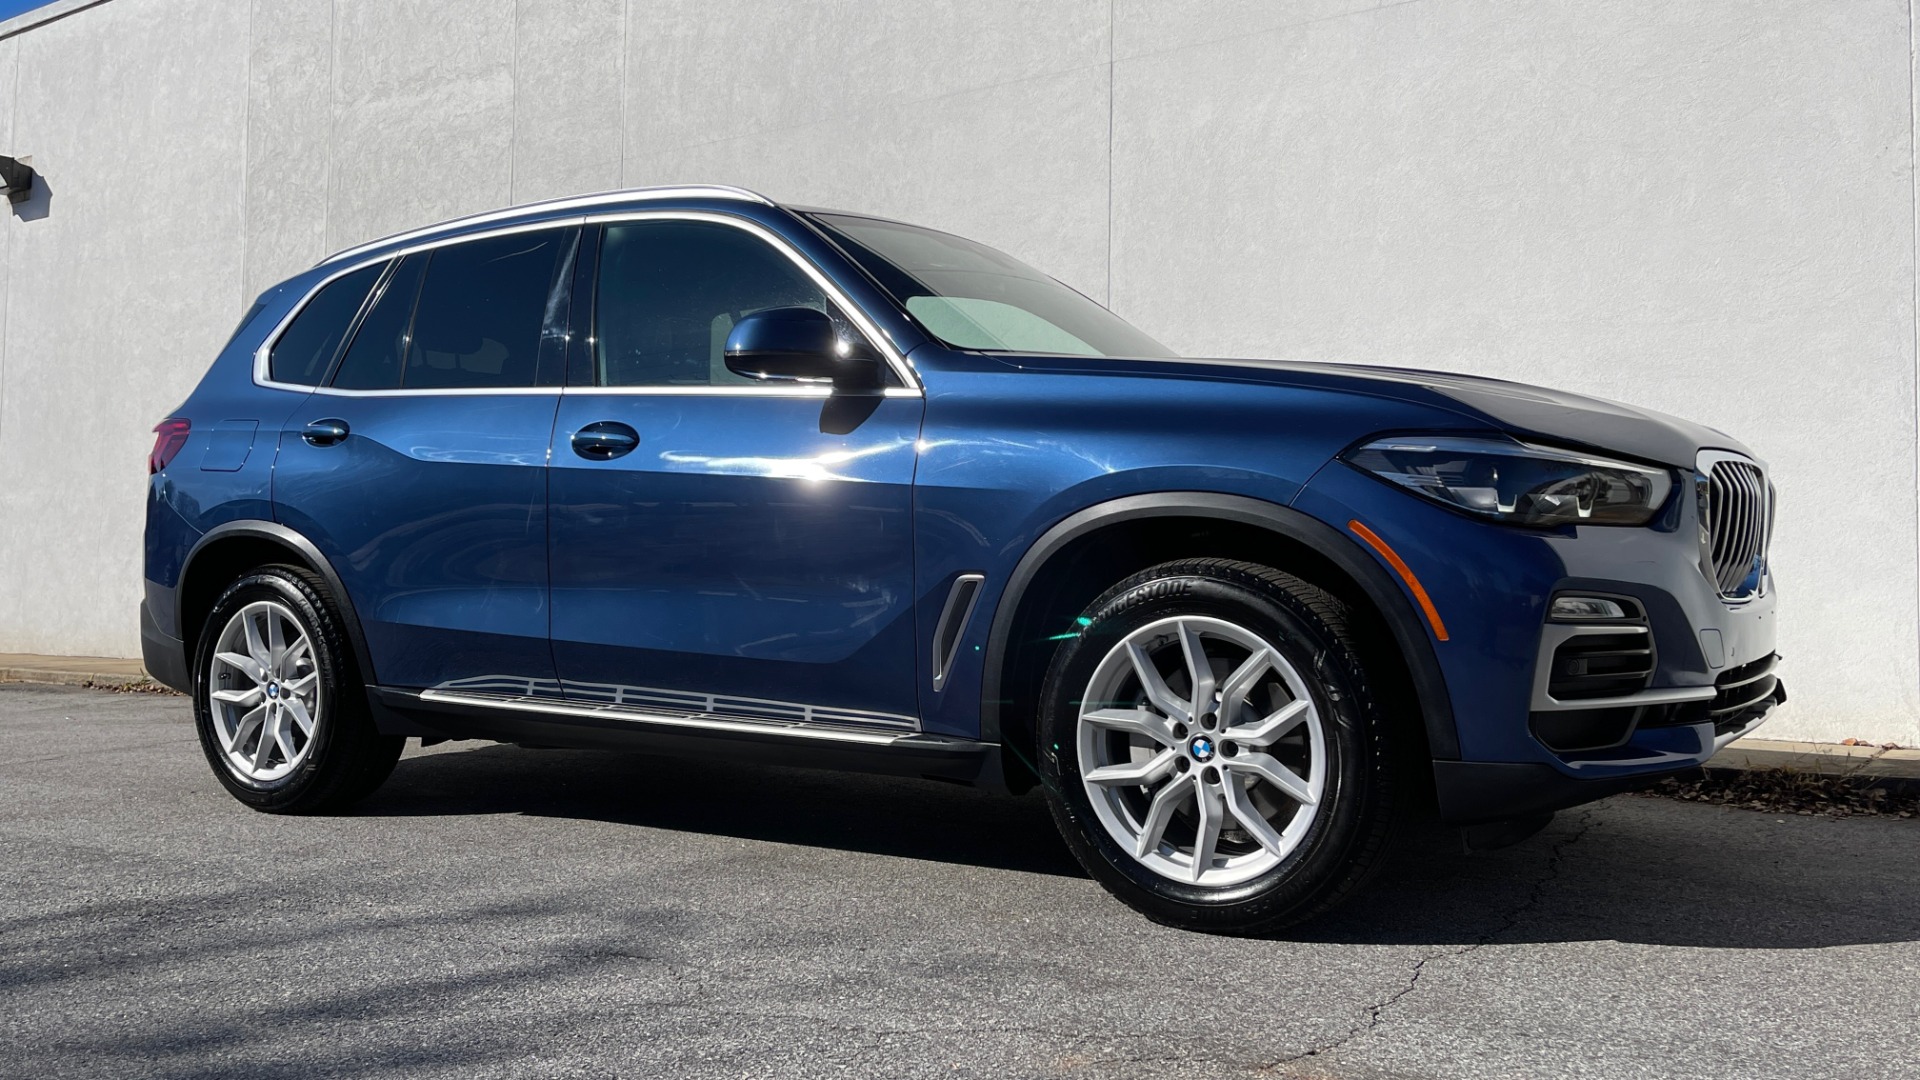 Used 2019 BMW X5 XDRIVE40I / CONVENIENCE PKG / REMOTE START / TOWING / H/K SND / REARVIEW for sale $48,695 at Formula Imports in Charlotte NC 28227 5